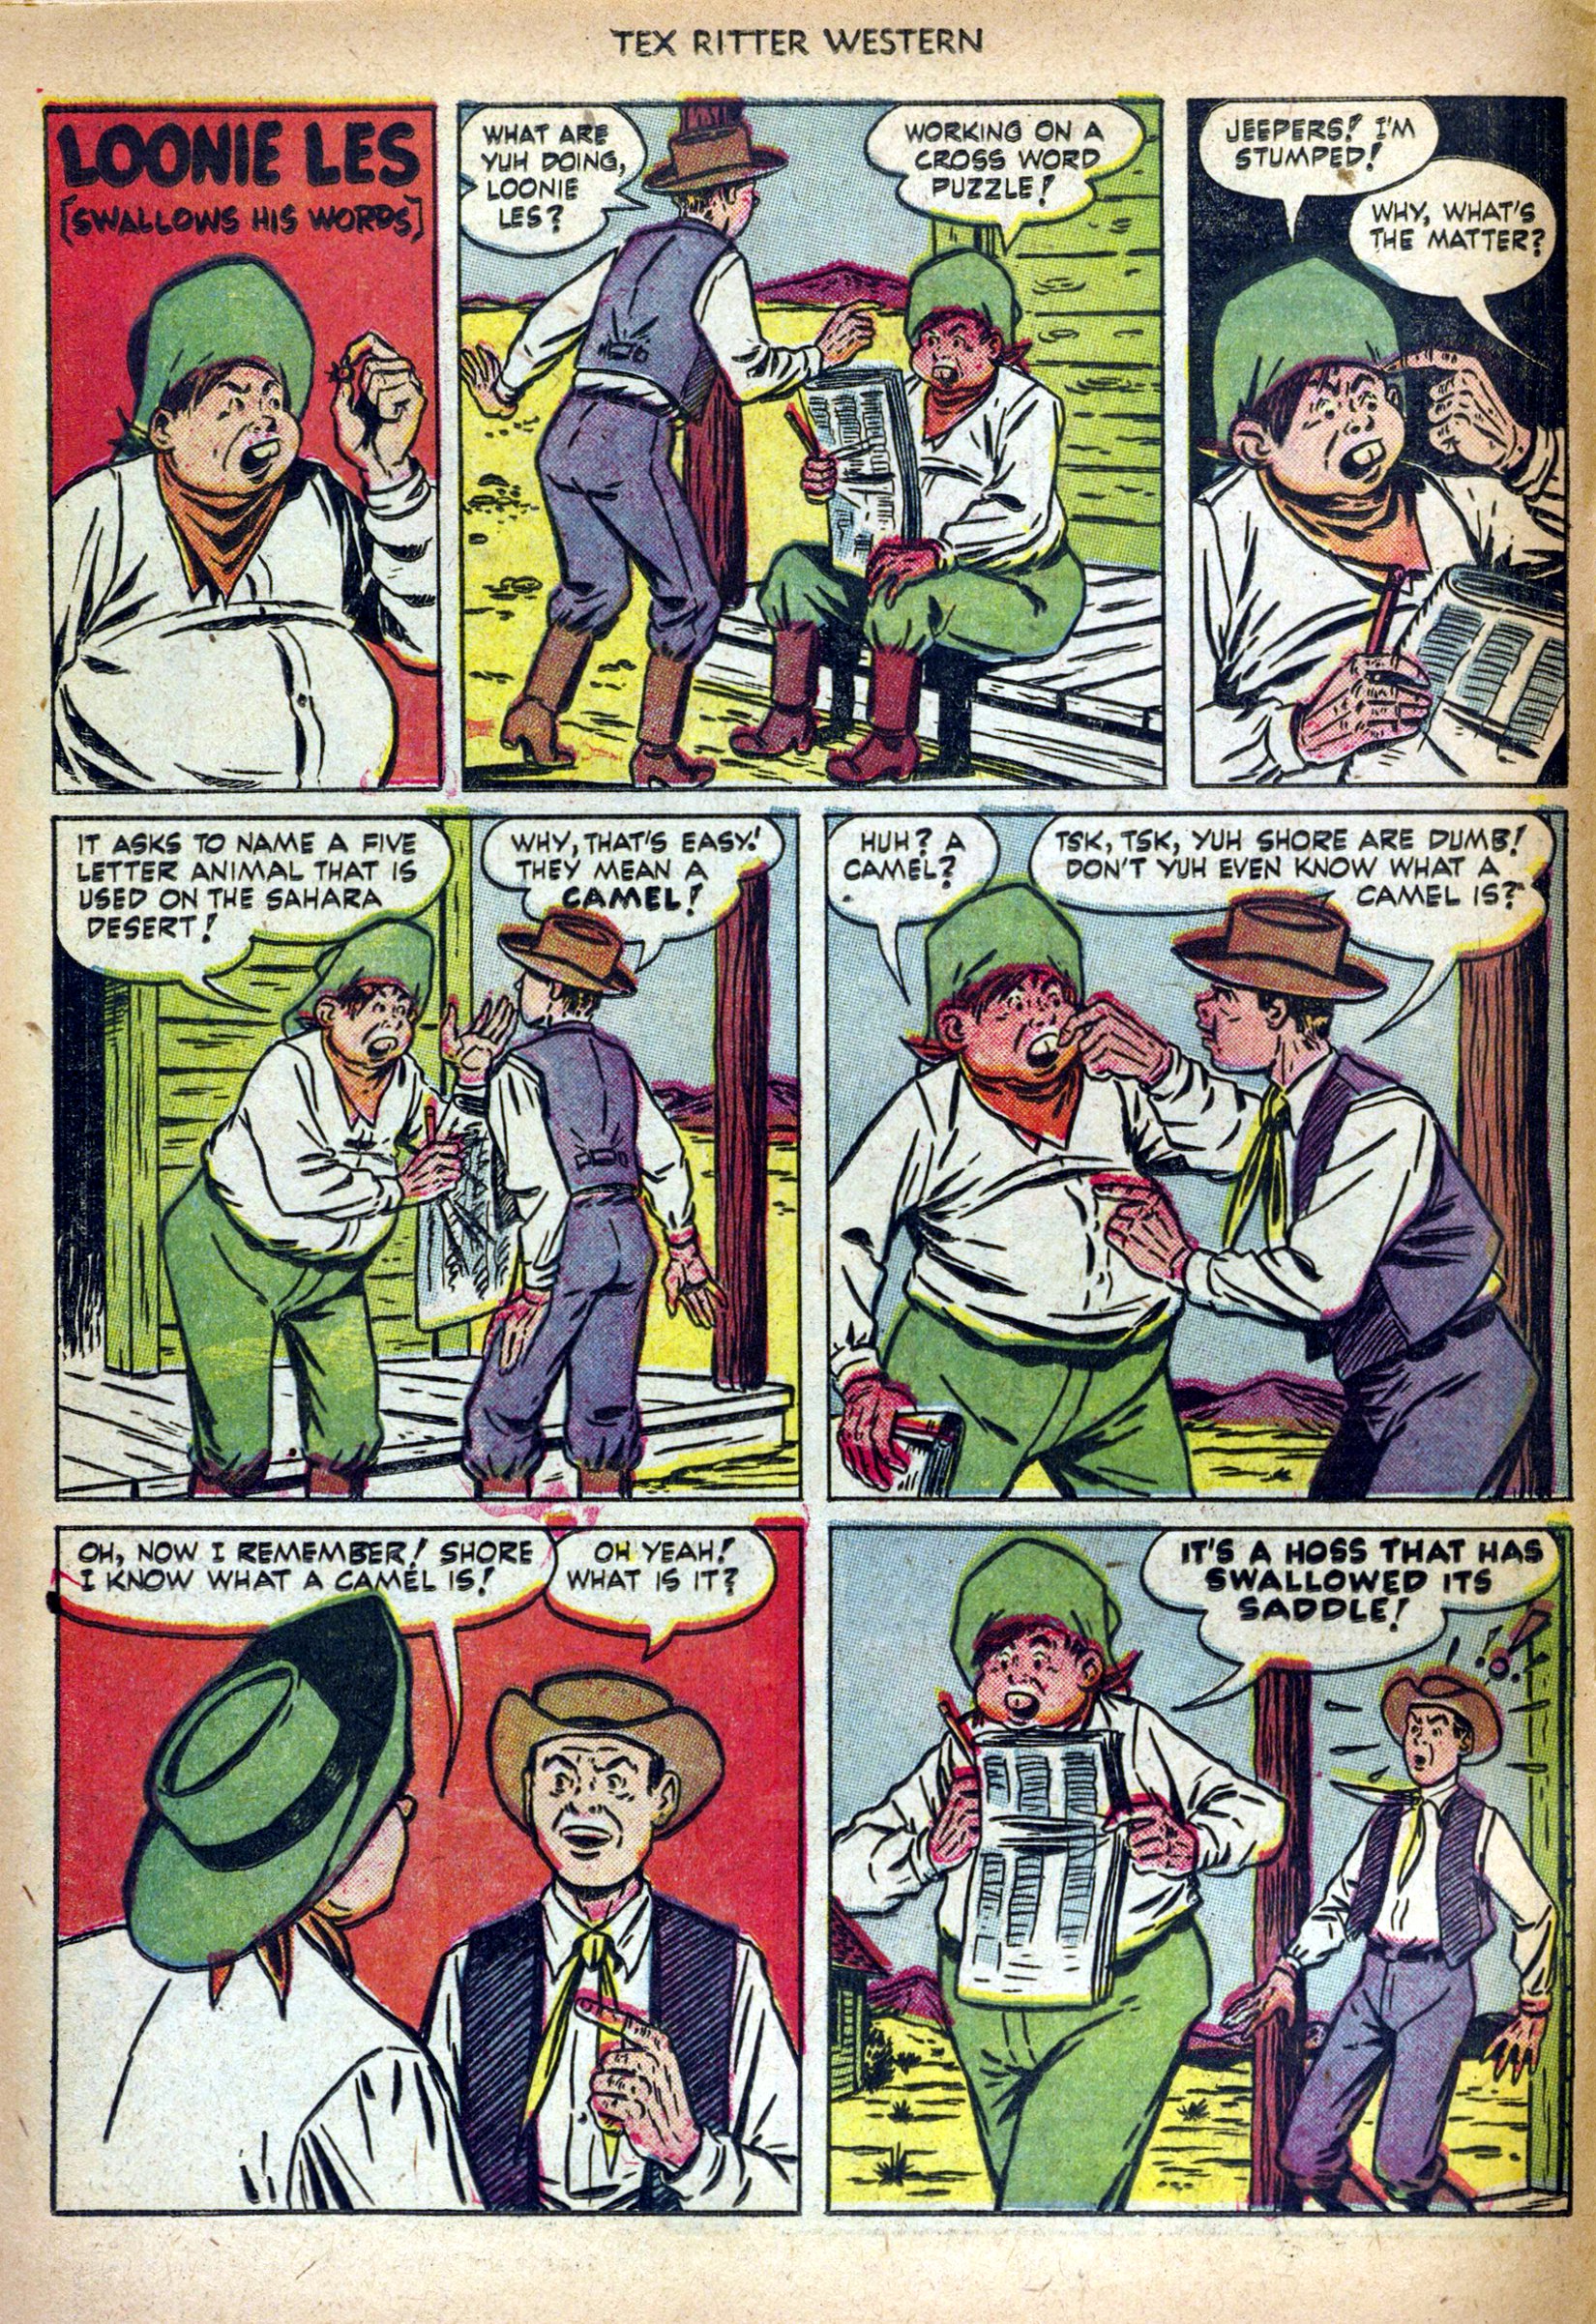 Read online Tex Ritter Western comic -  Issue #10 - 10